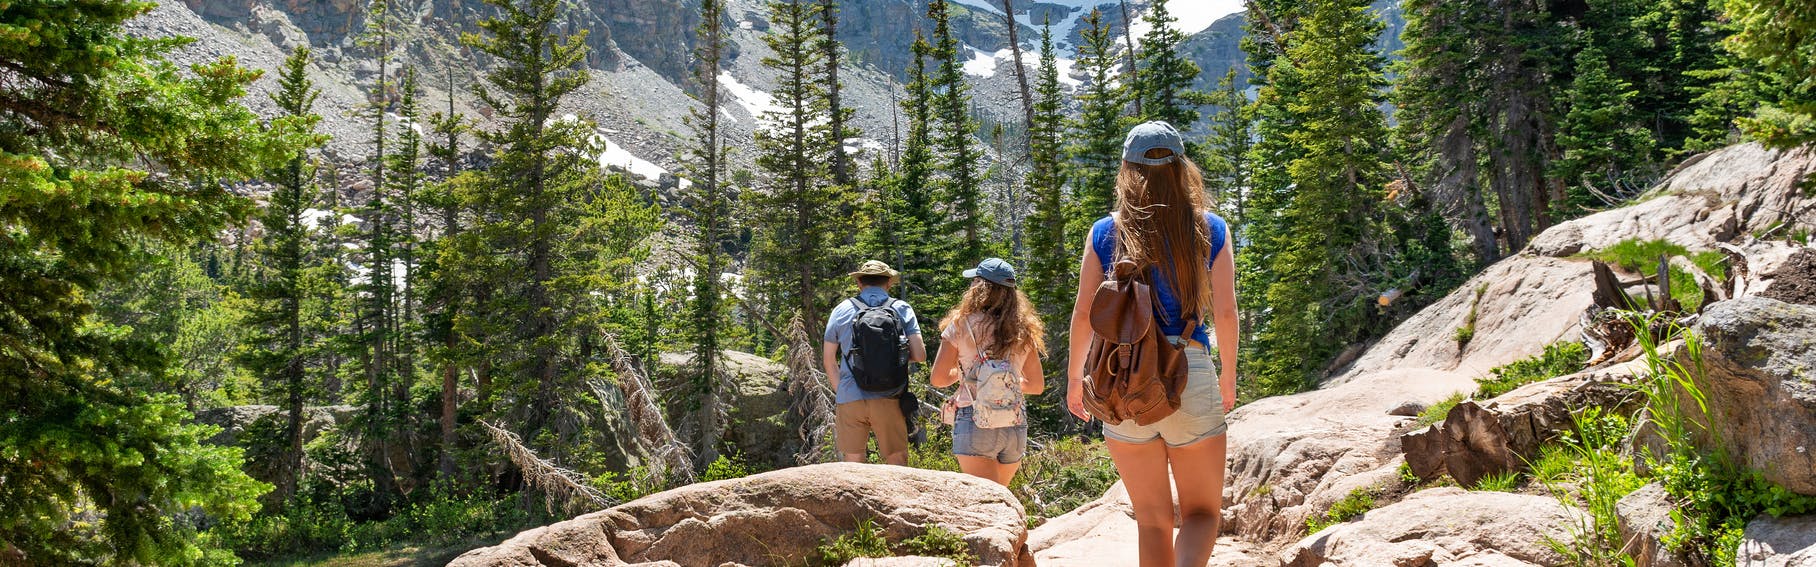 How to Safely Hike in the Summer